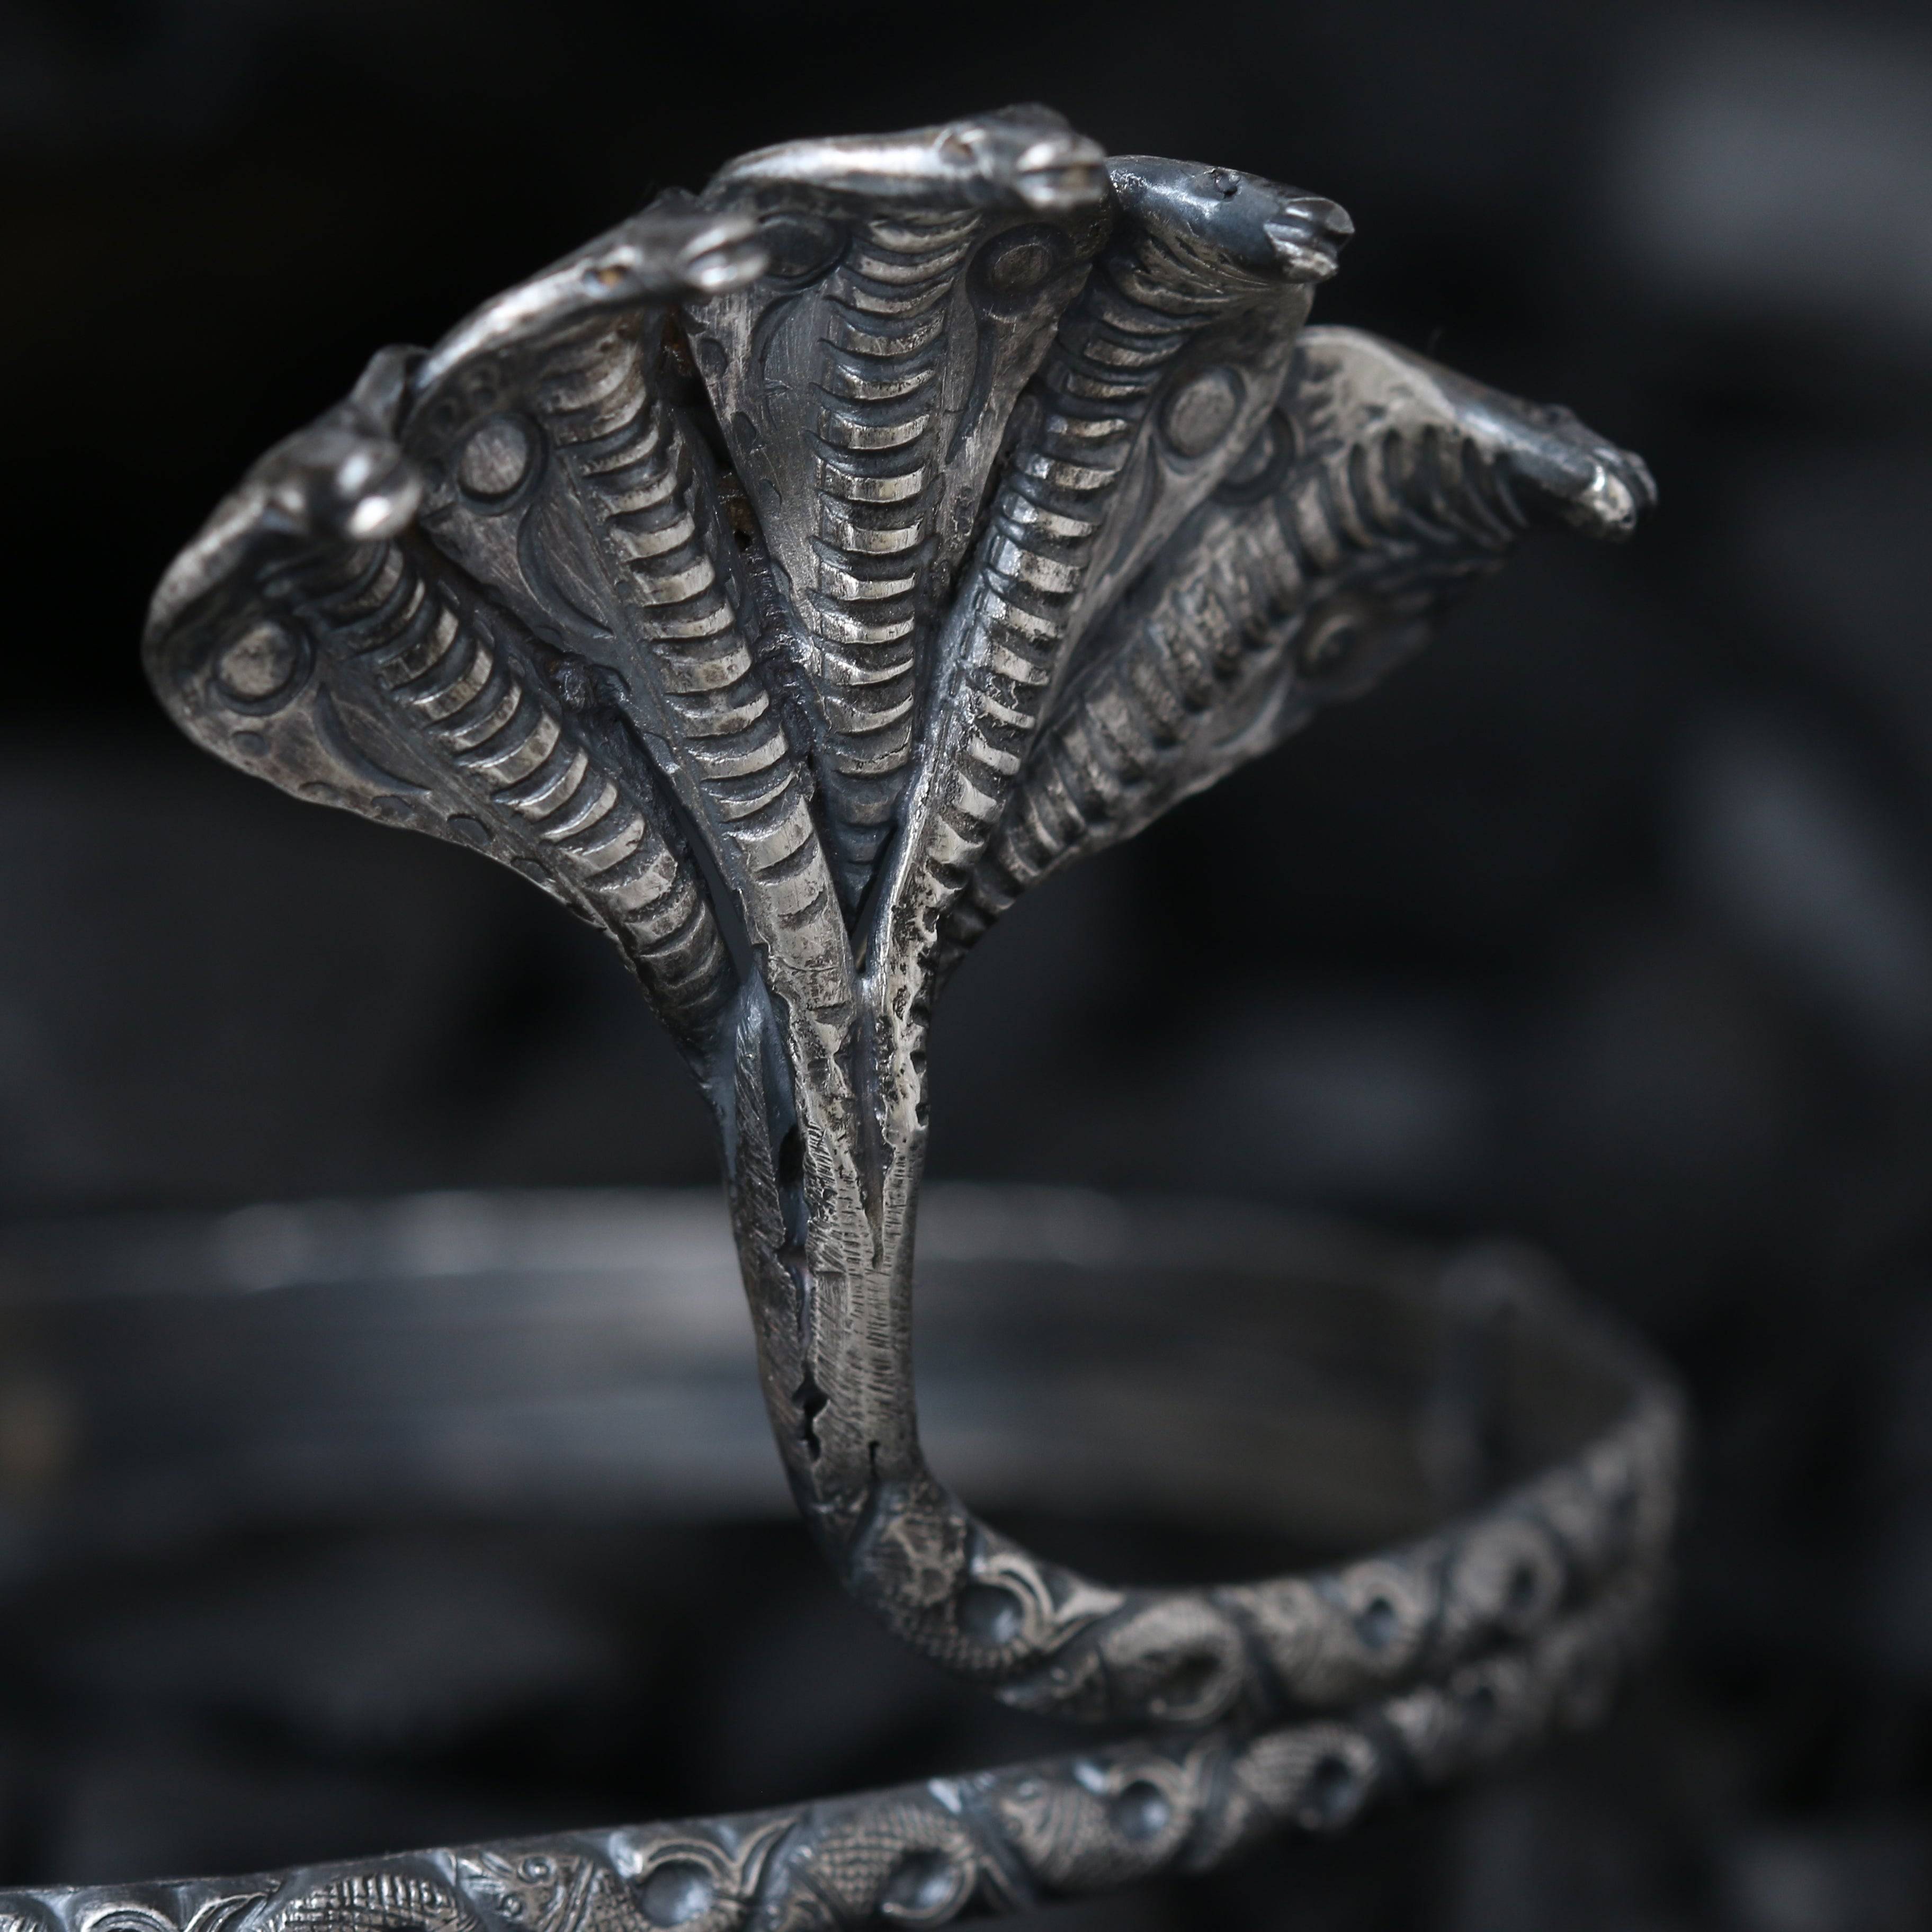 a close up of a silver ring with a snake design on it